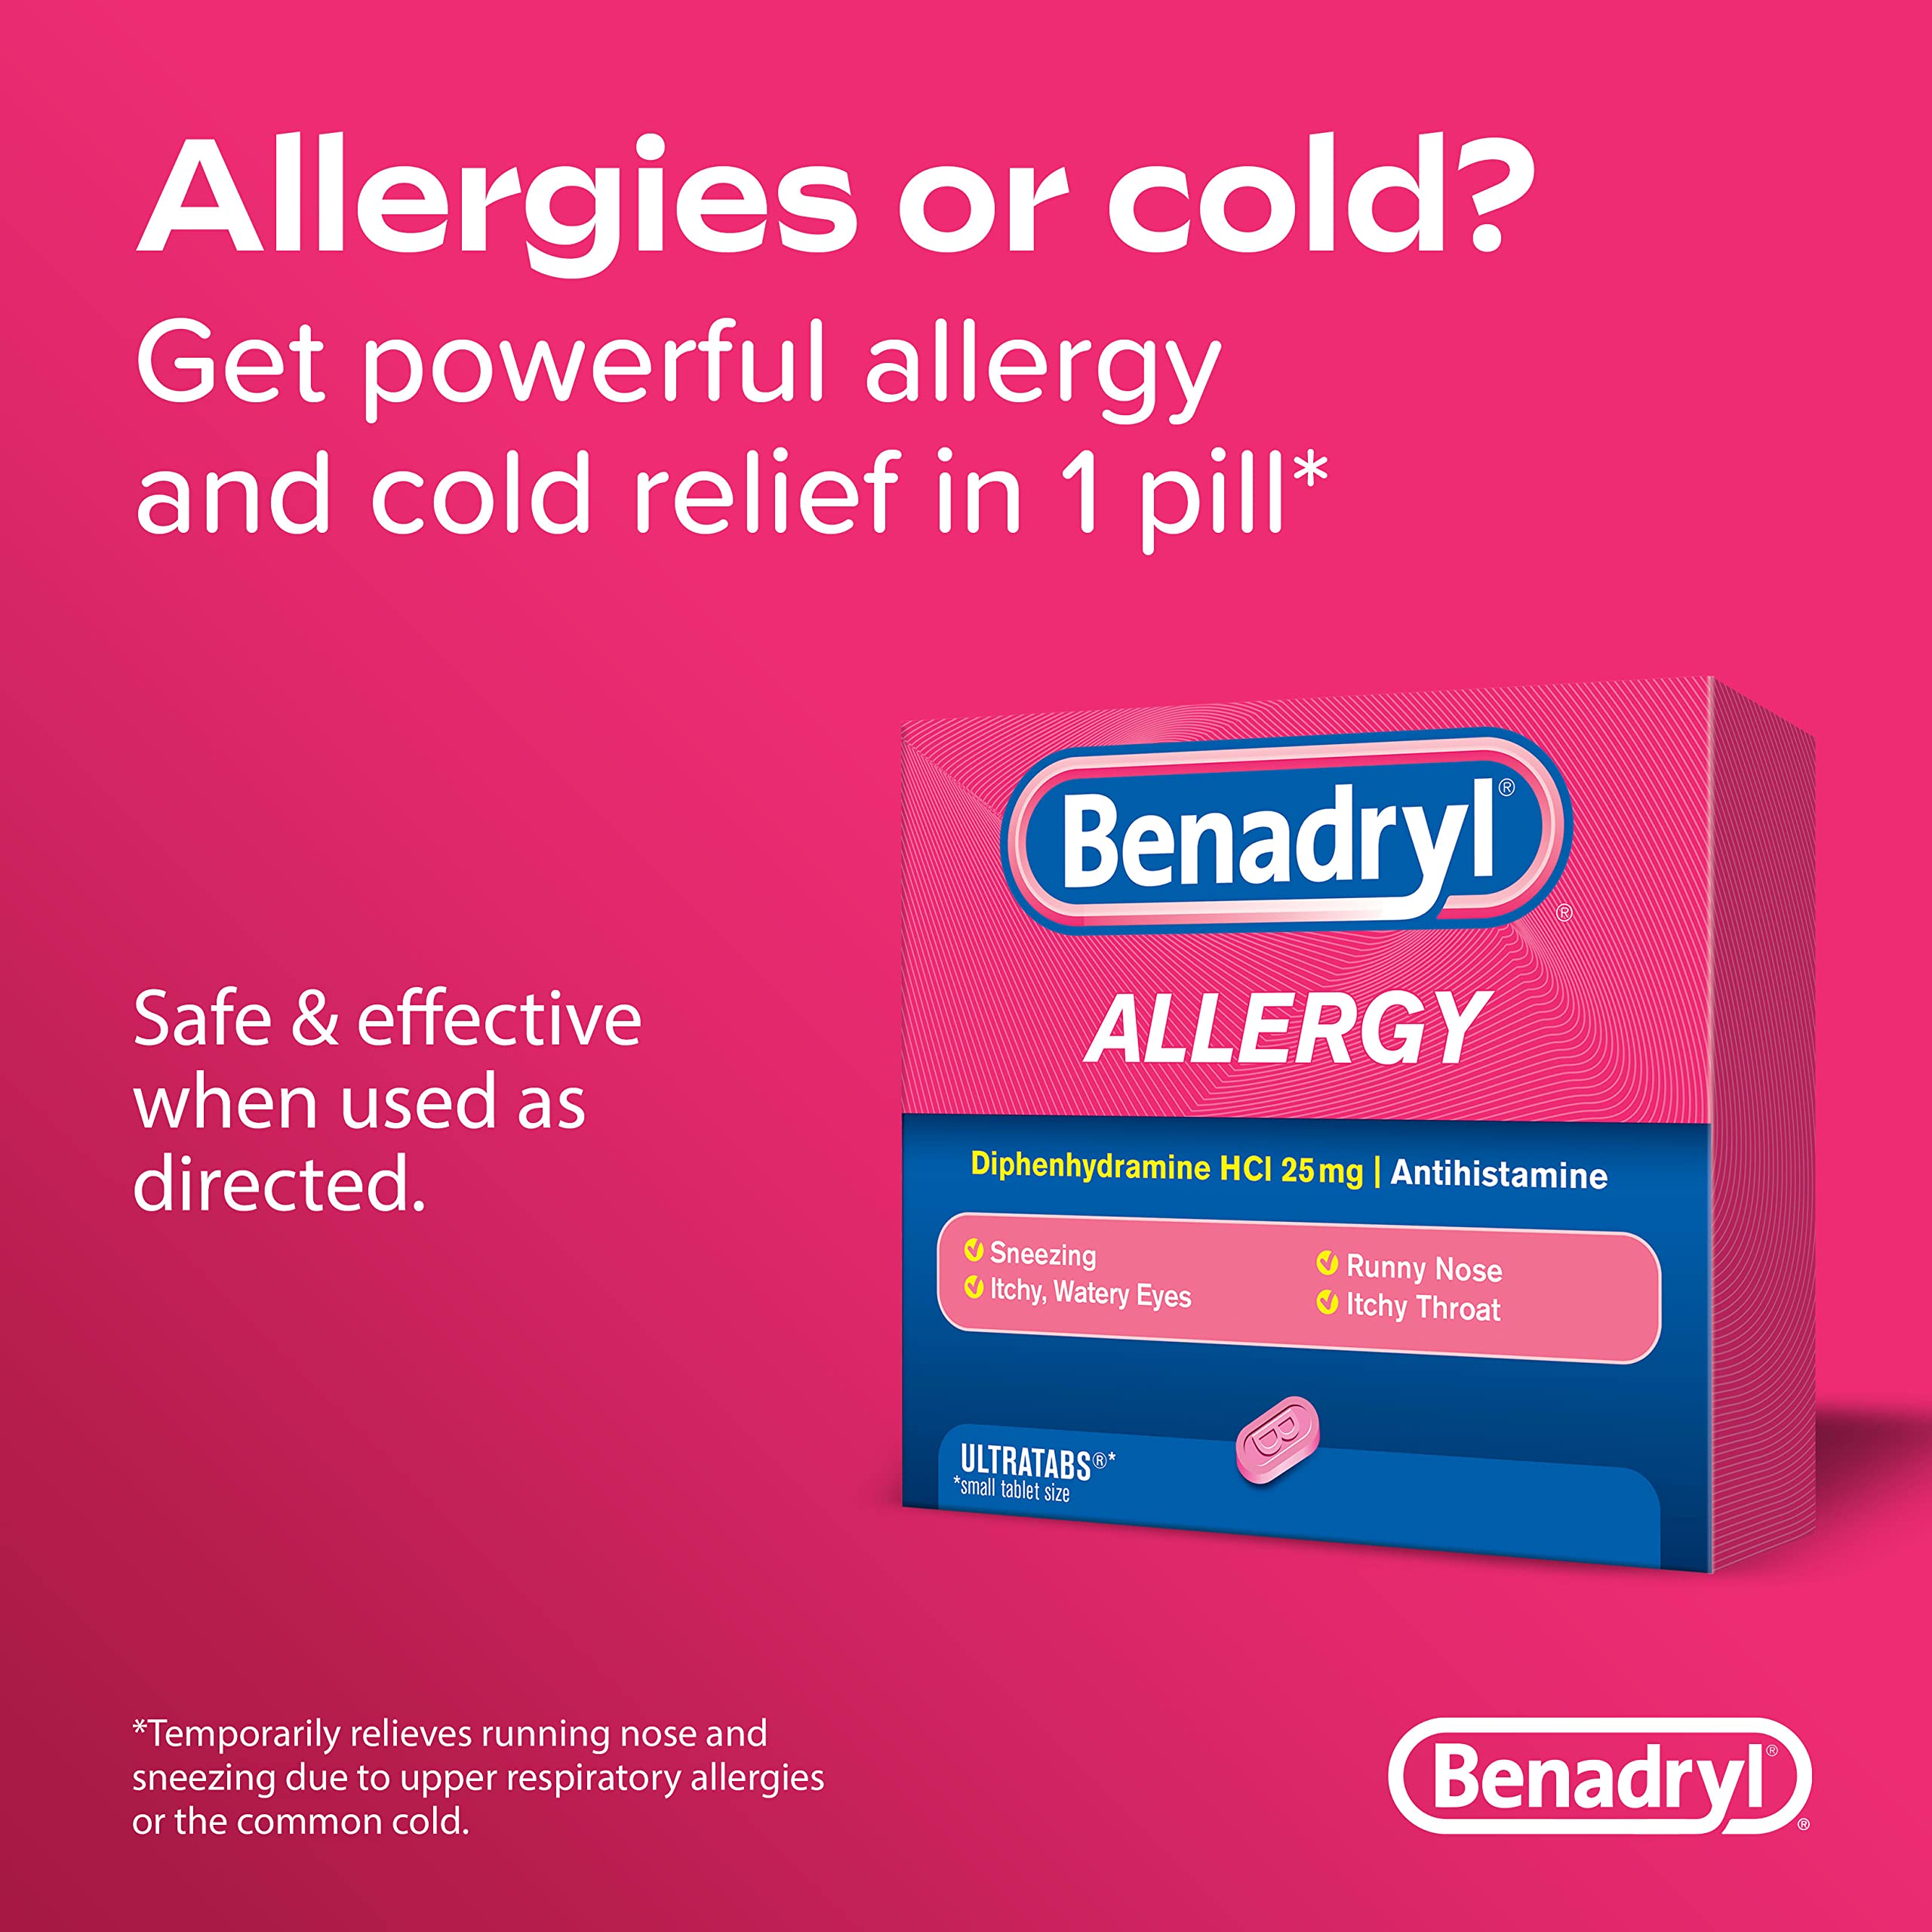 Benadryl Ultratabs Antihistamine Allergy Relief Medicine, 25 mg Diphenhydramine HCl Tablets for Relief of Cold & Allergy Symptoms Such as Sneezing, Runny Nose, & Itchy Eyes & Throat, 48 ct